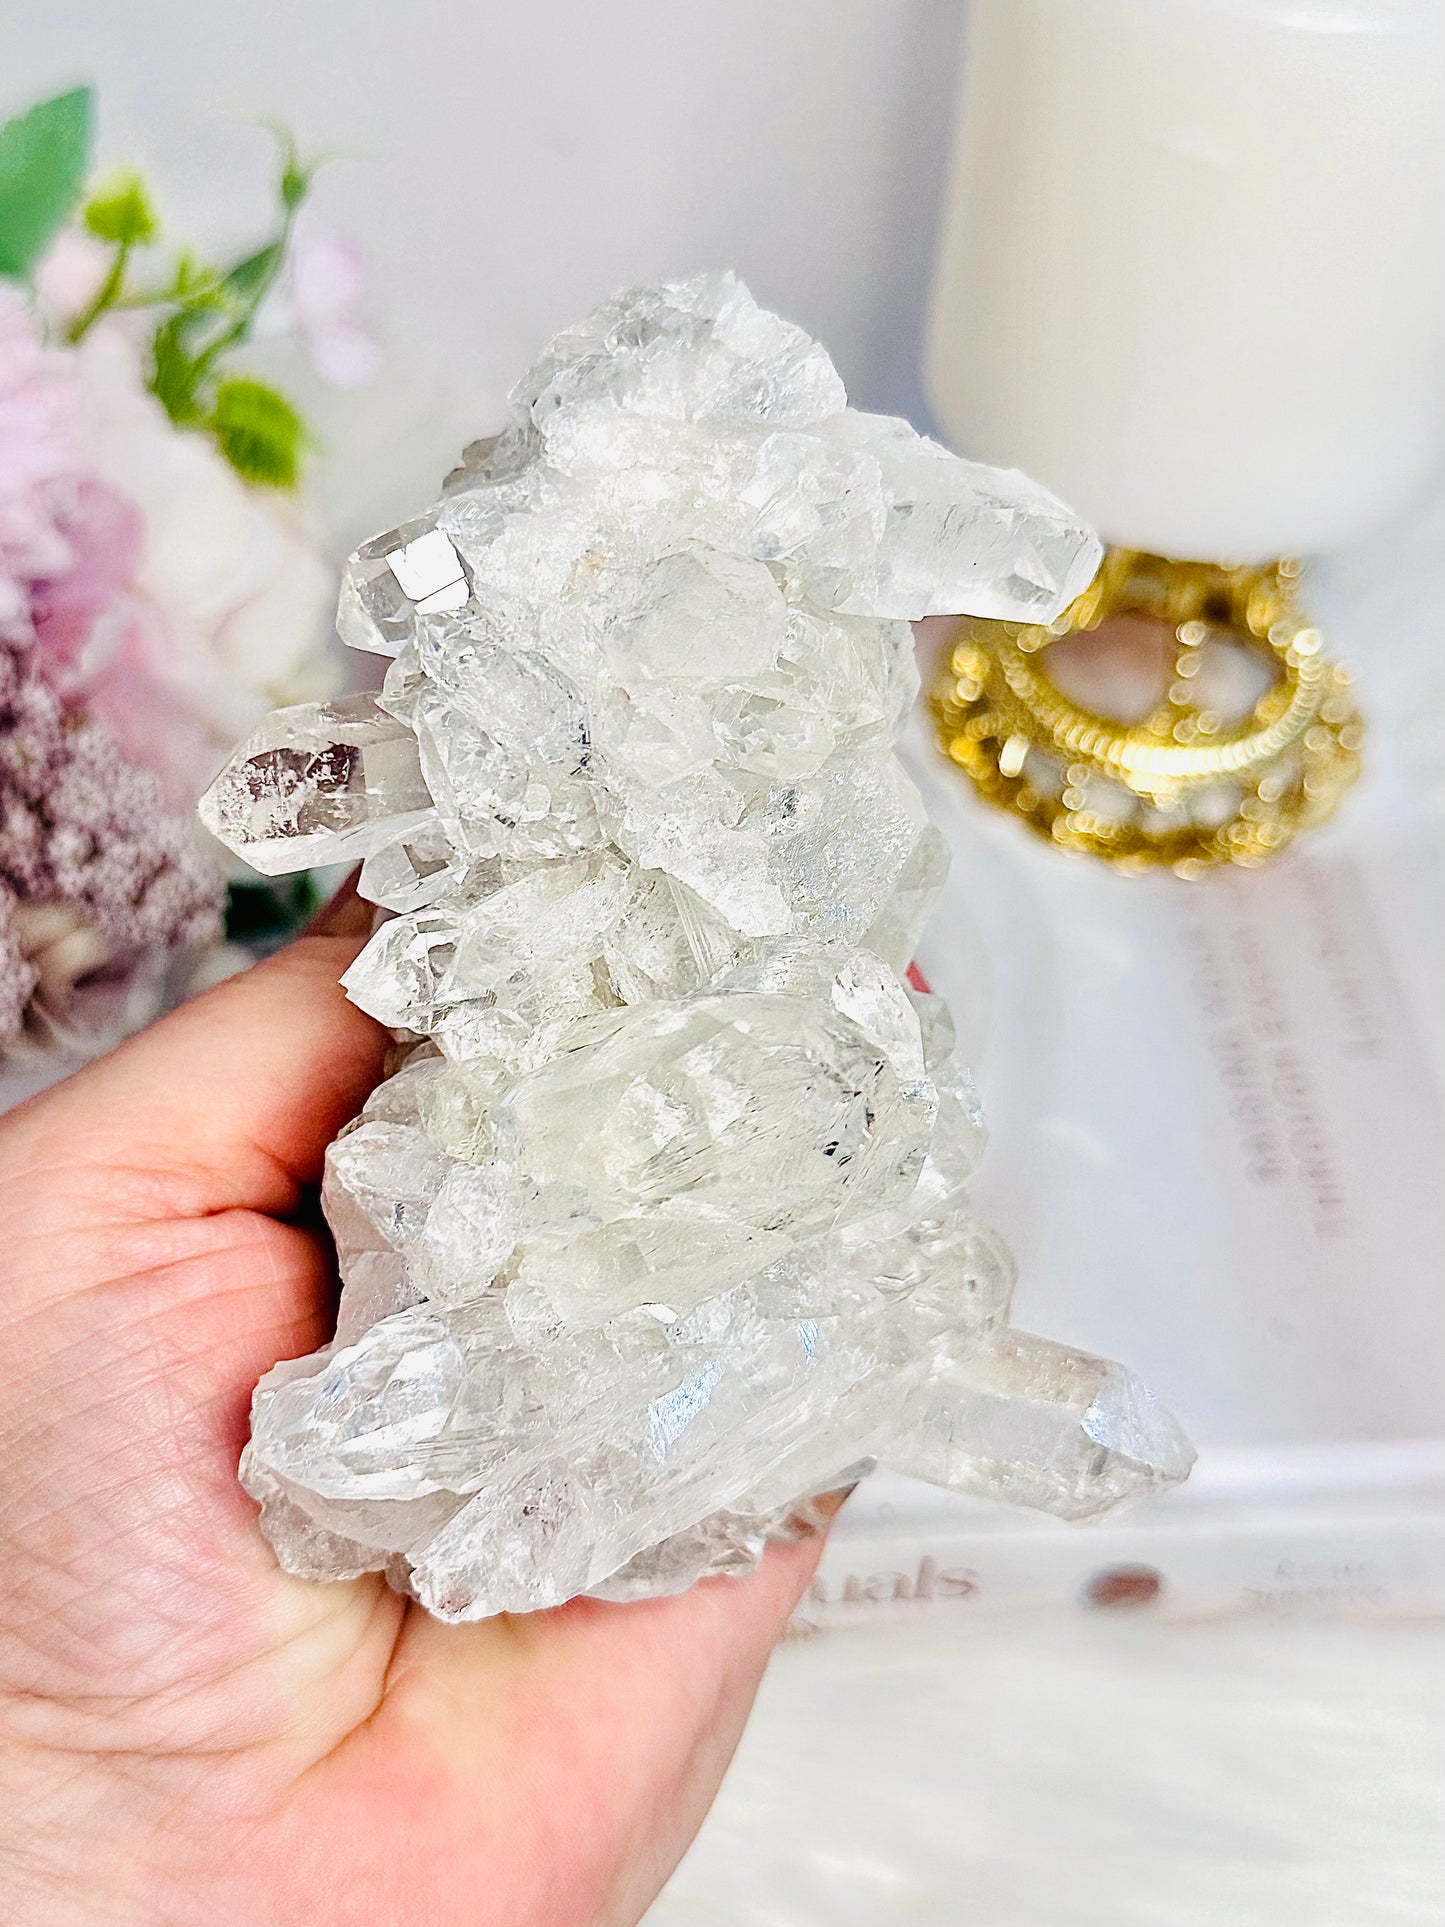 Absolutely Stunning High Quality Clear Quartz Natural Cluster Specimen From Brazil 11.5cm 415grams